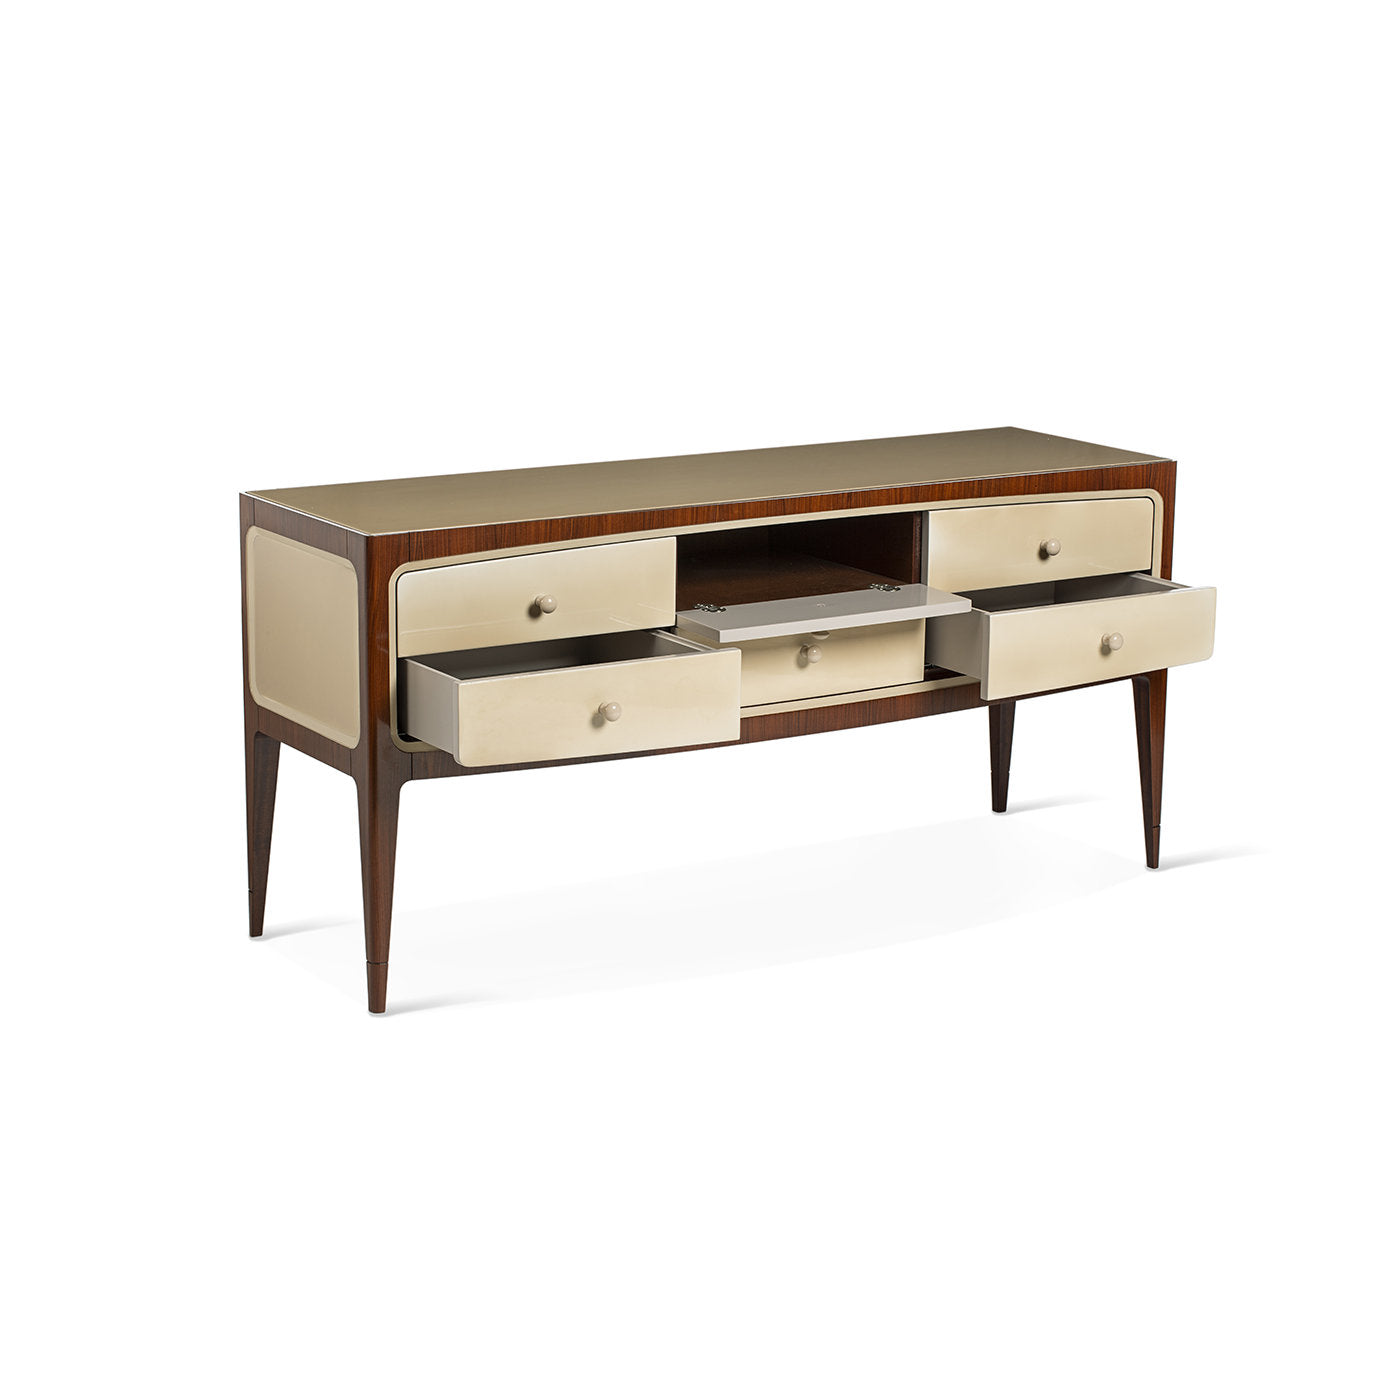 60s Style Beechwood Sideboard with Drawers 8712 - Alternative view 3